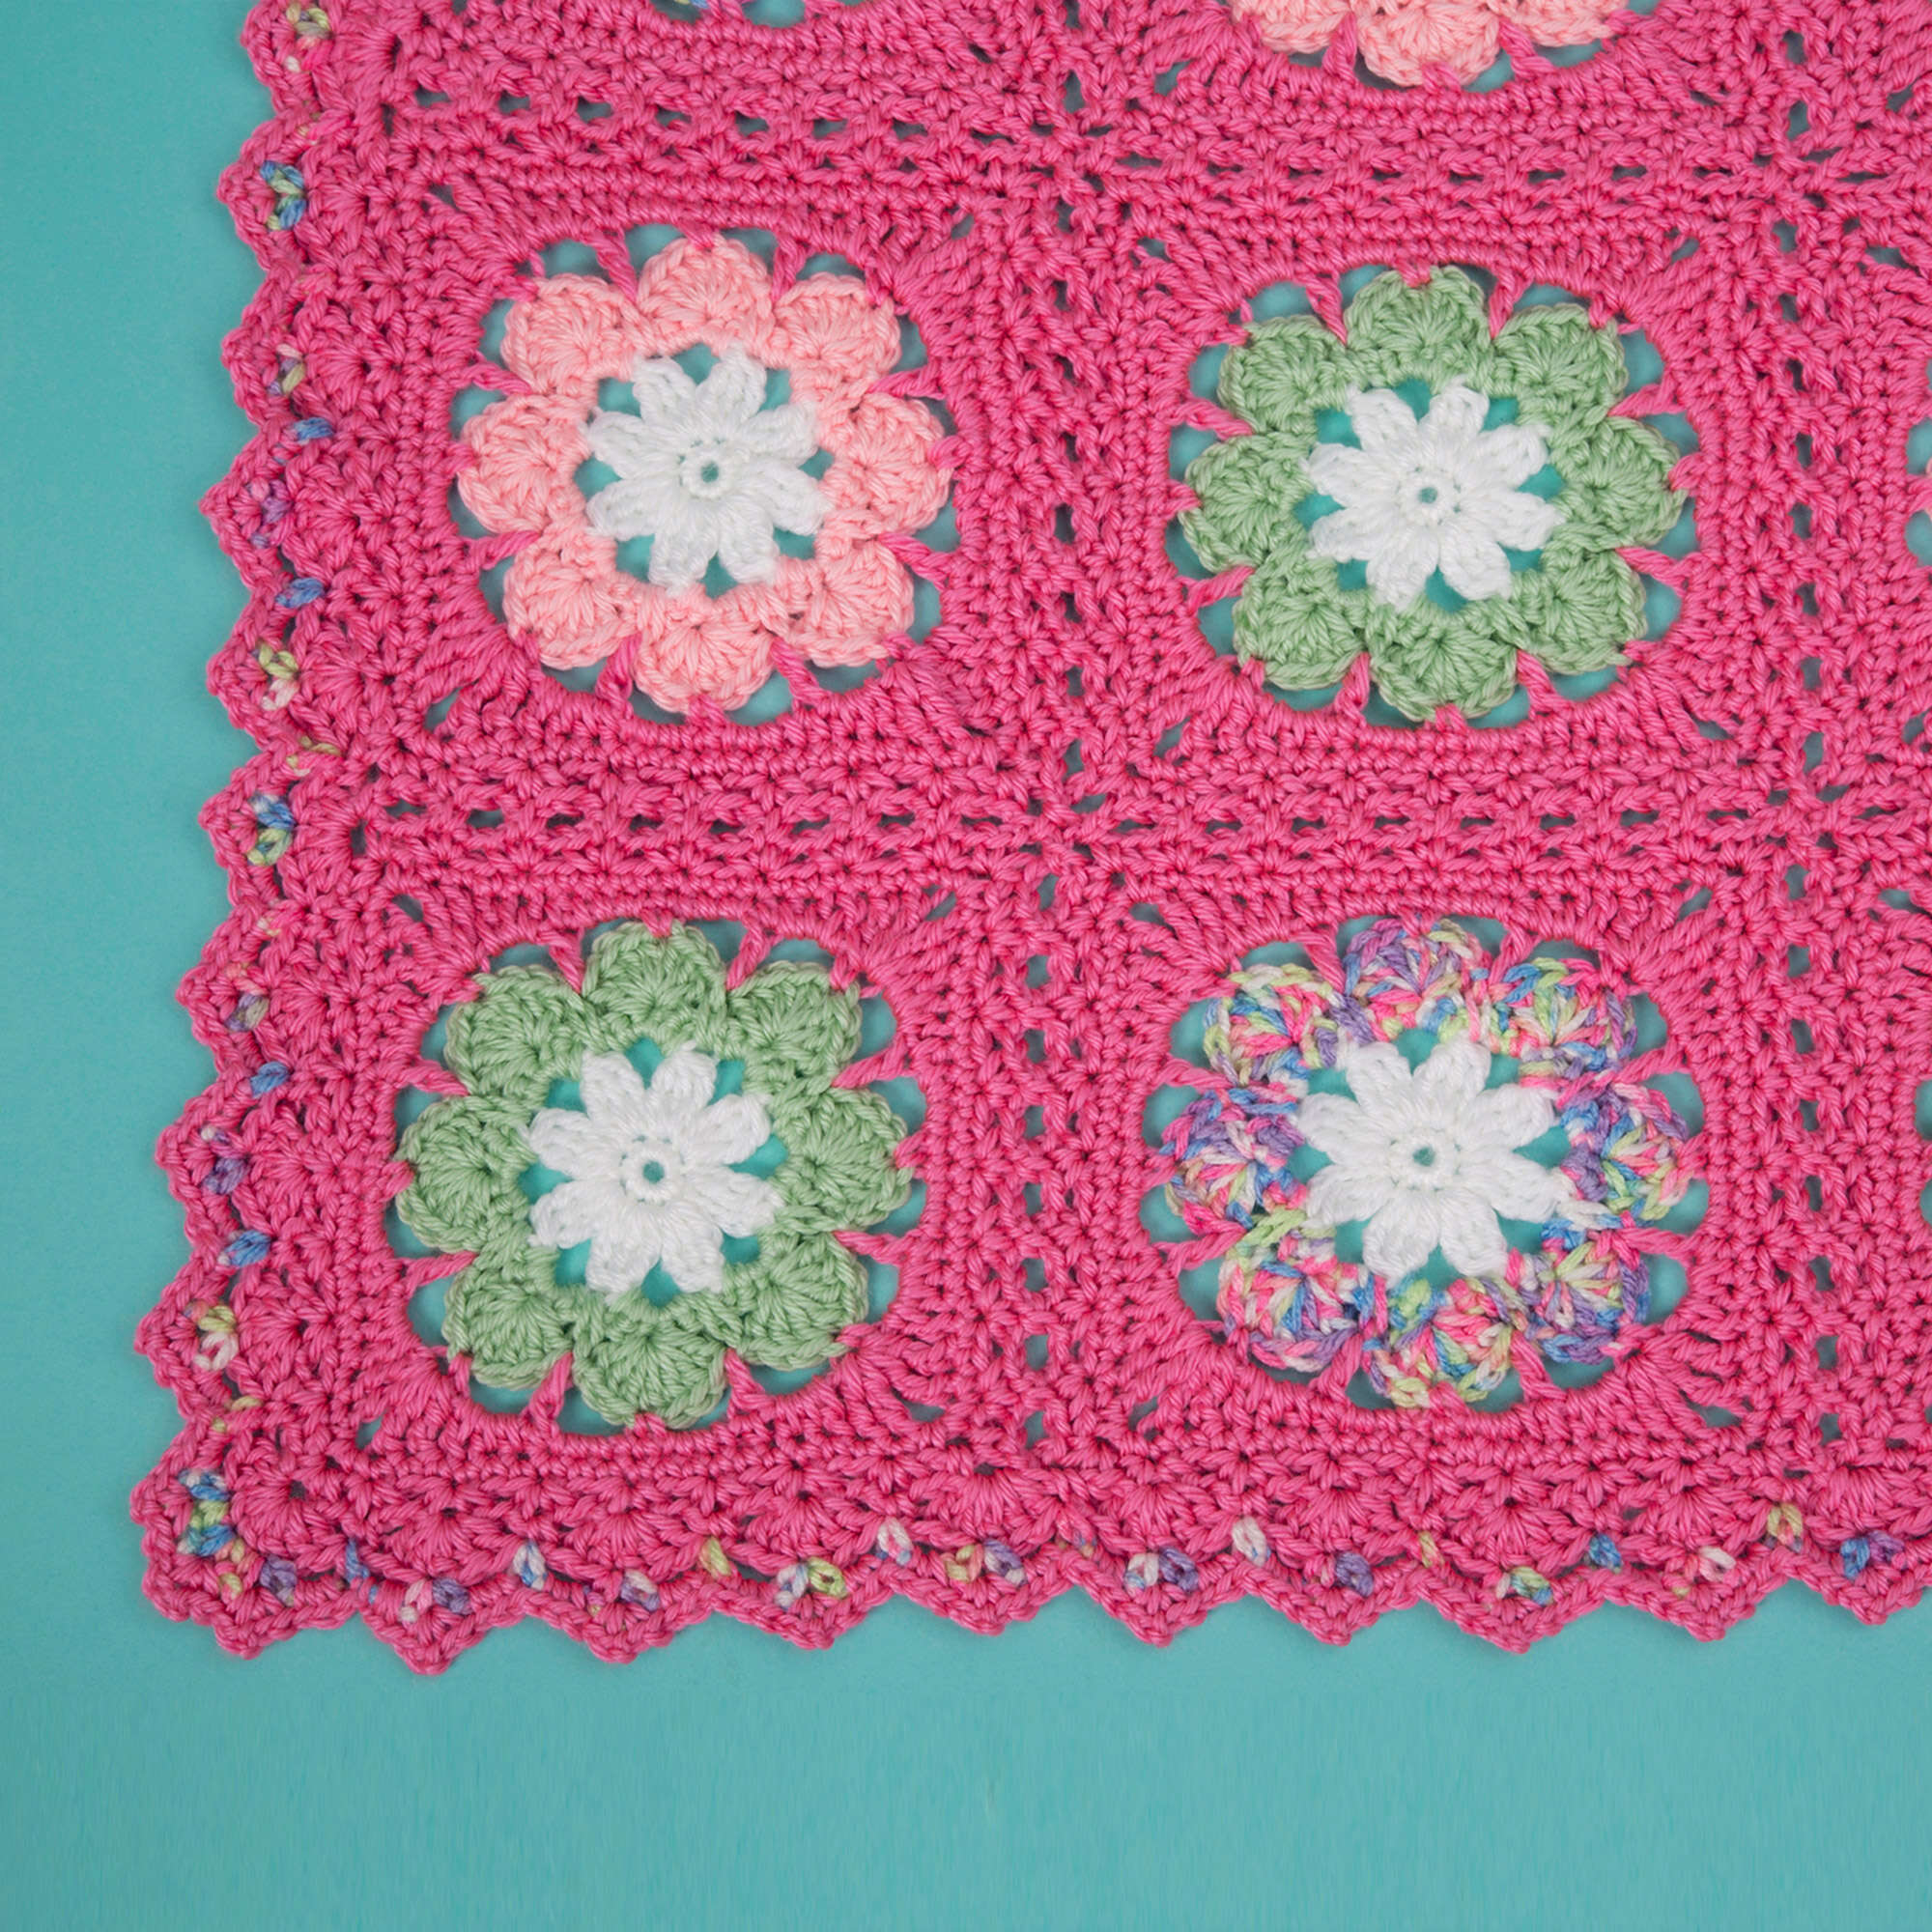 Crochet Flower Kit #1 – Welcome to Craft House